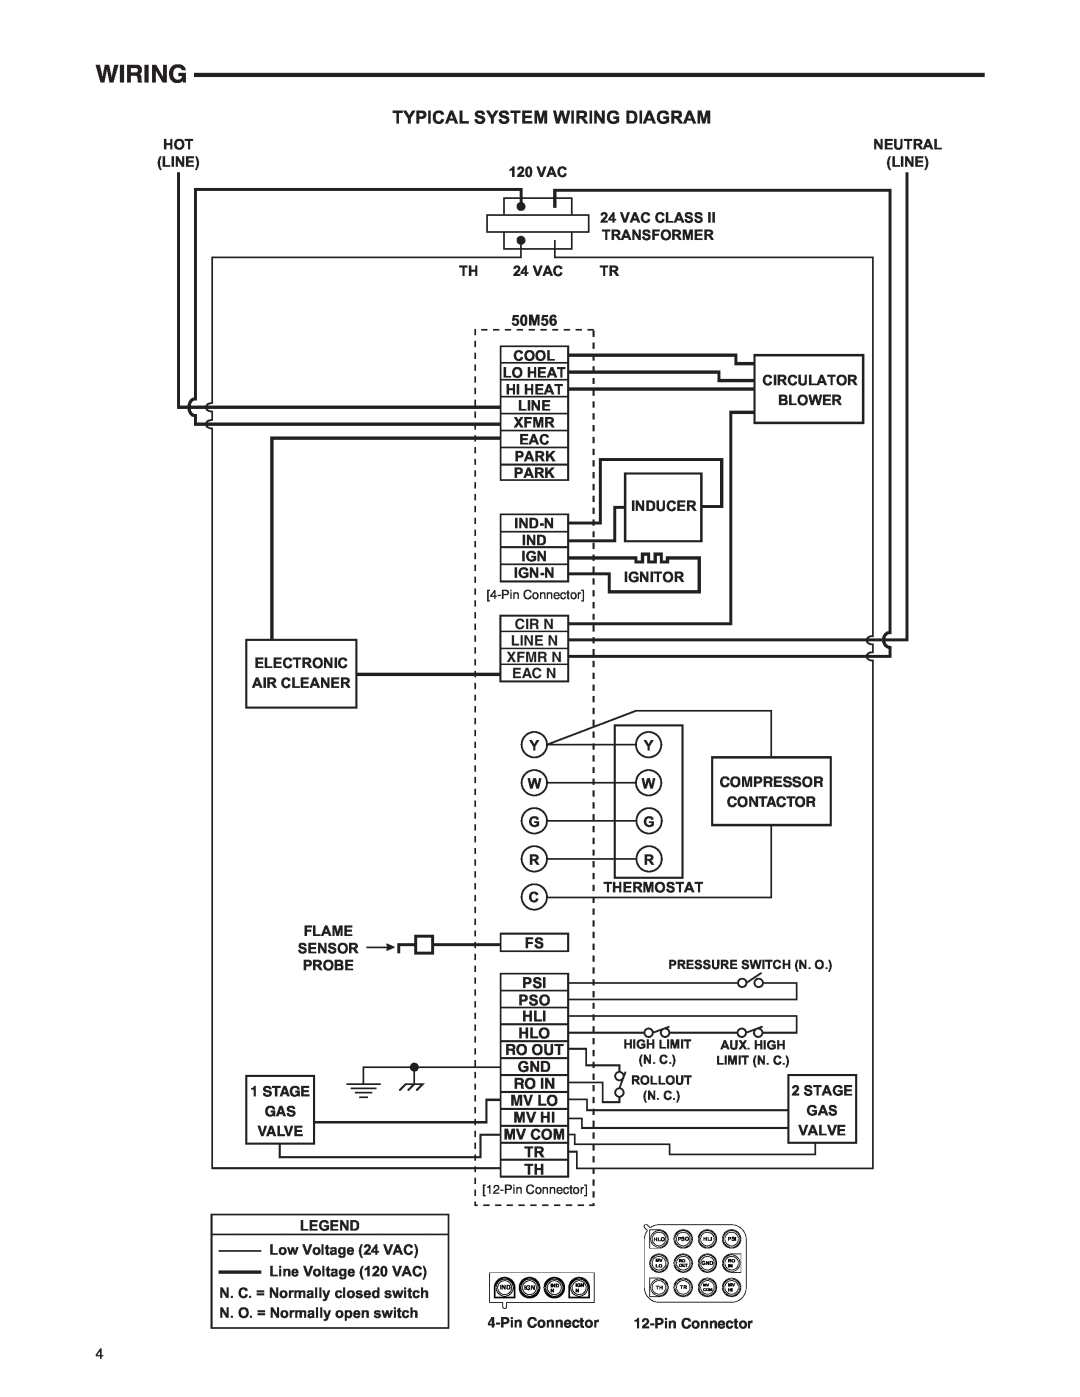 White Rodgers 50M56-743 Typical System Wiring Diagram, Cir N, Line N, Xfmr N, Eac N, Compressor, Contactor, Ro Out 